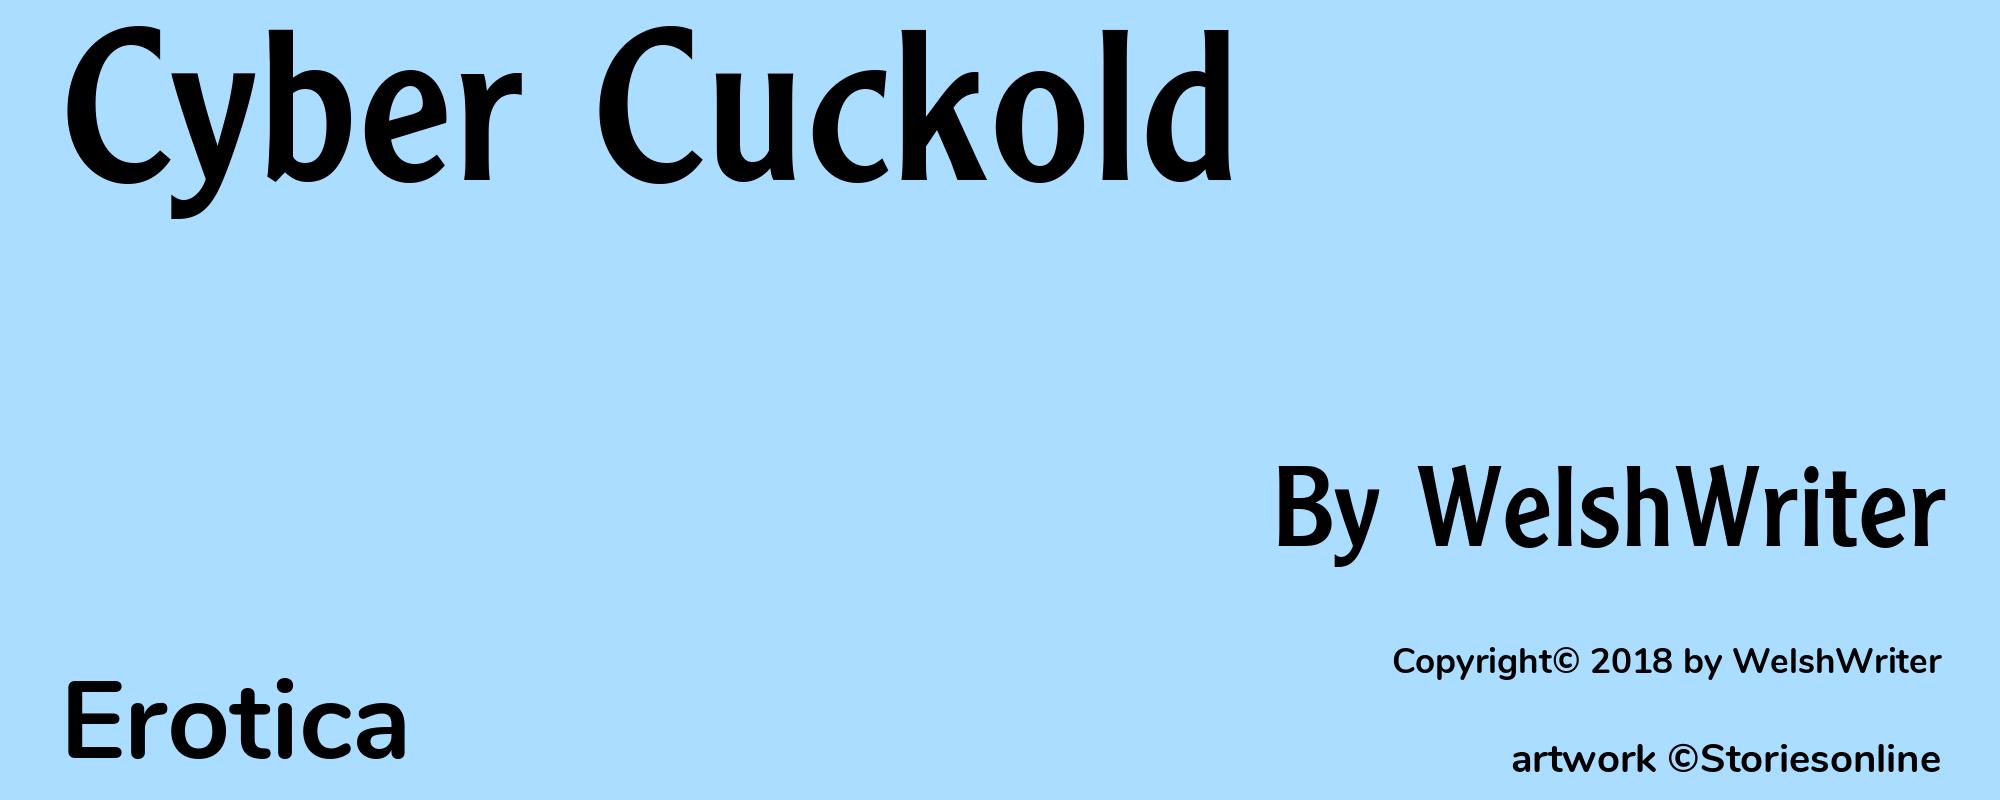 Cyber Cuckold - Cover